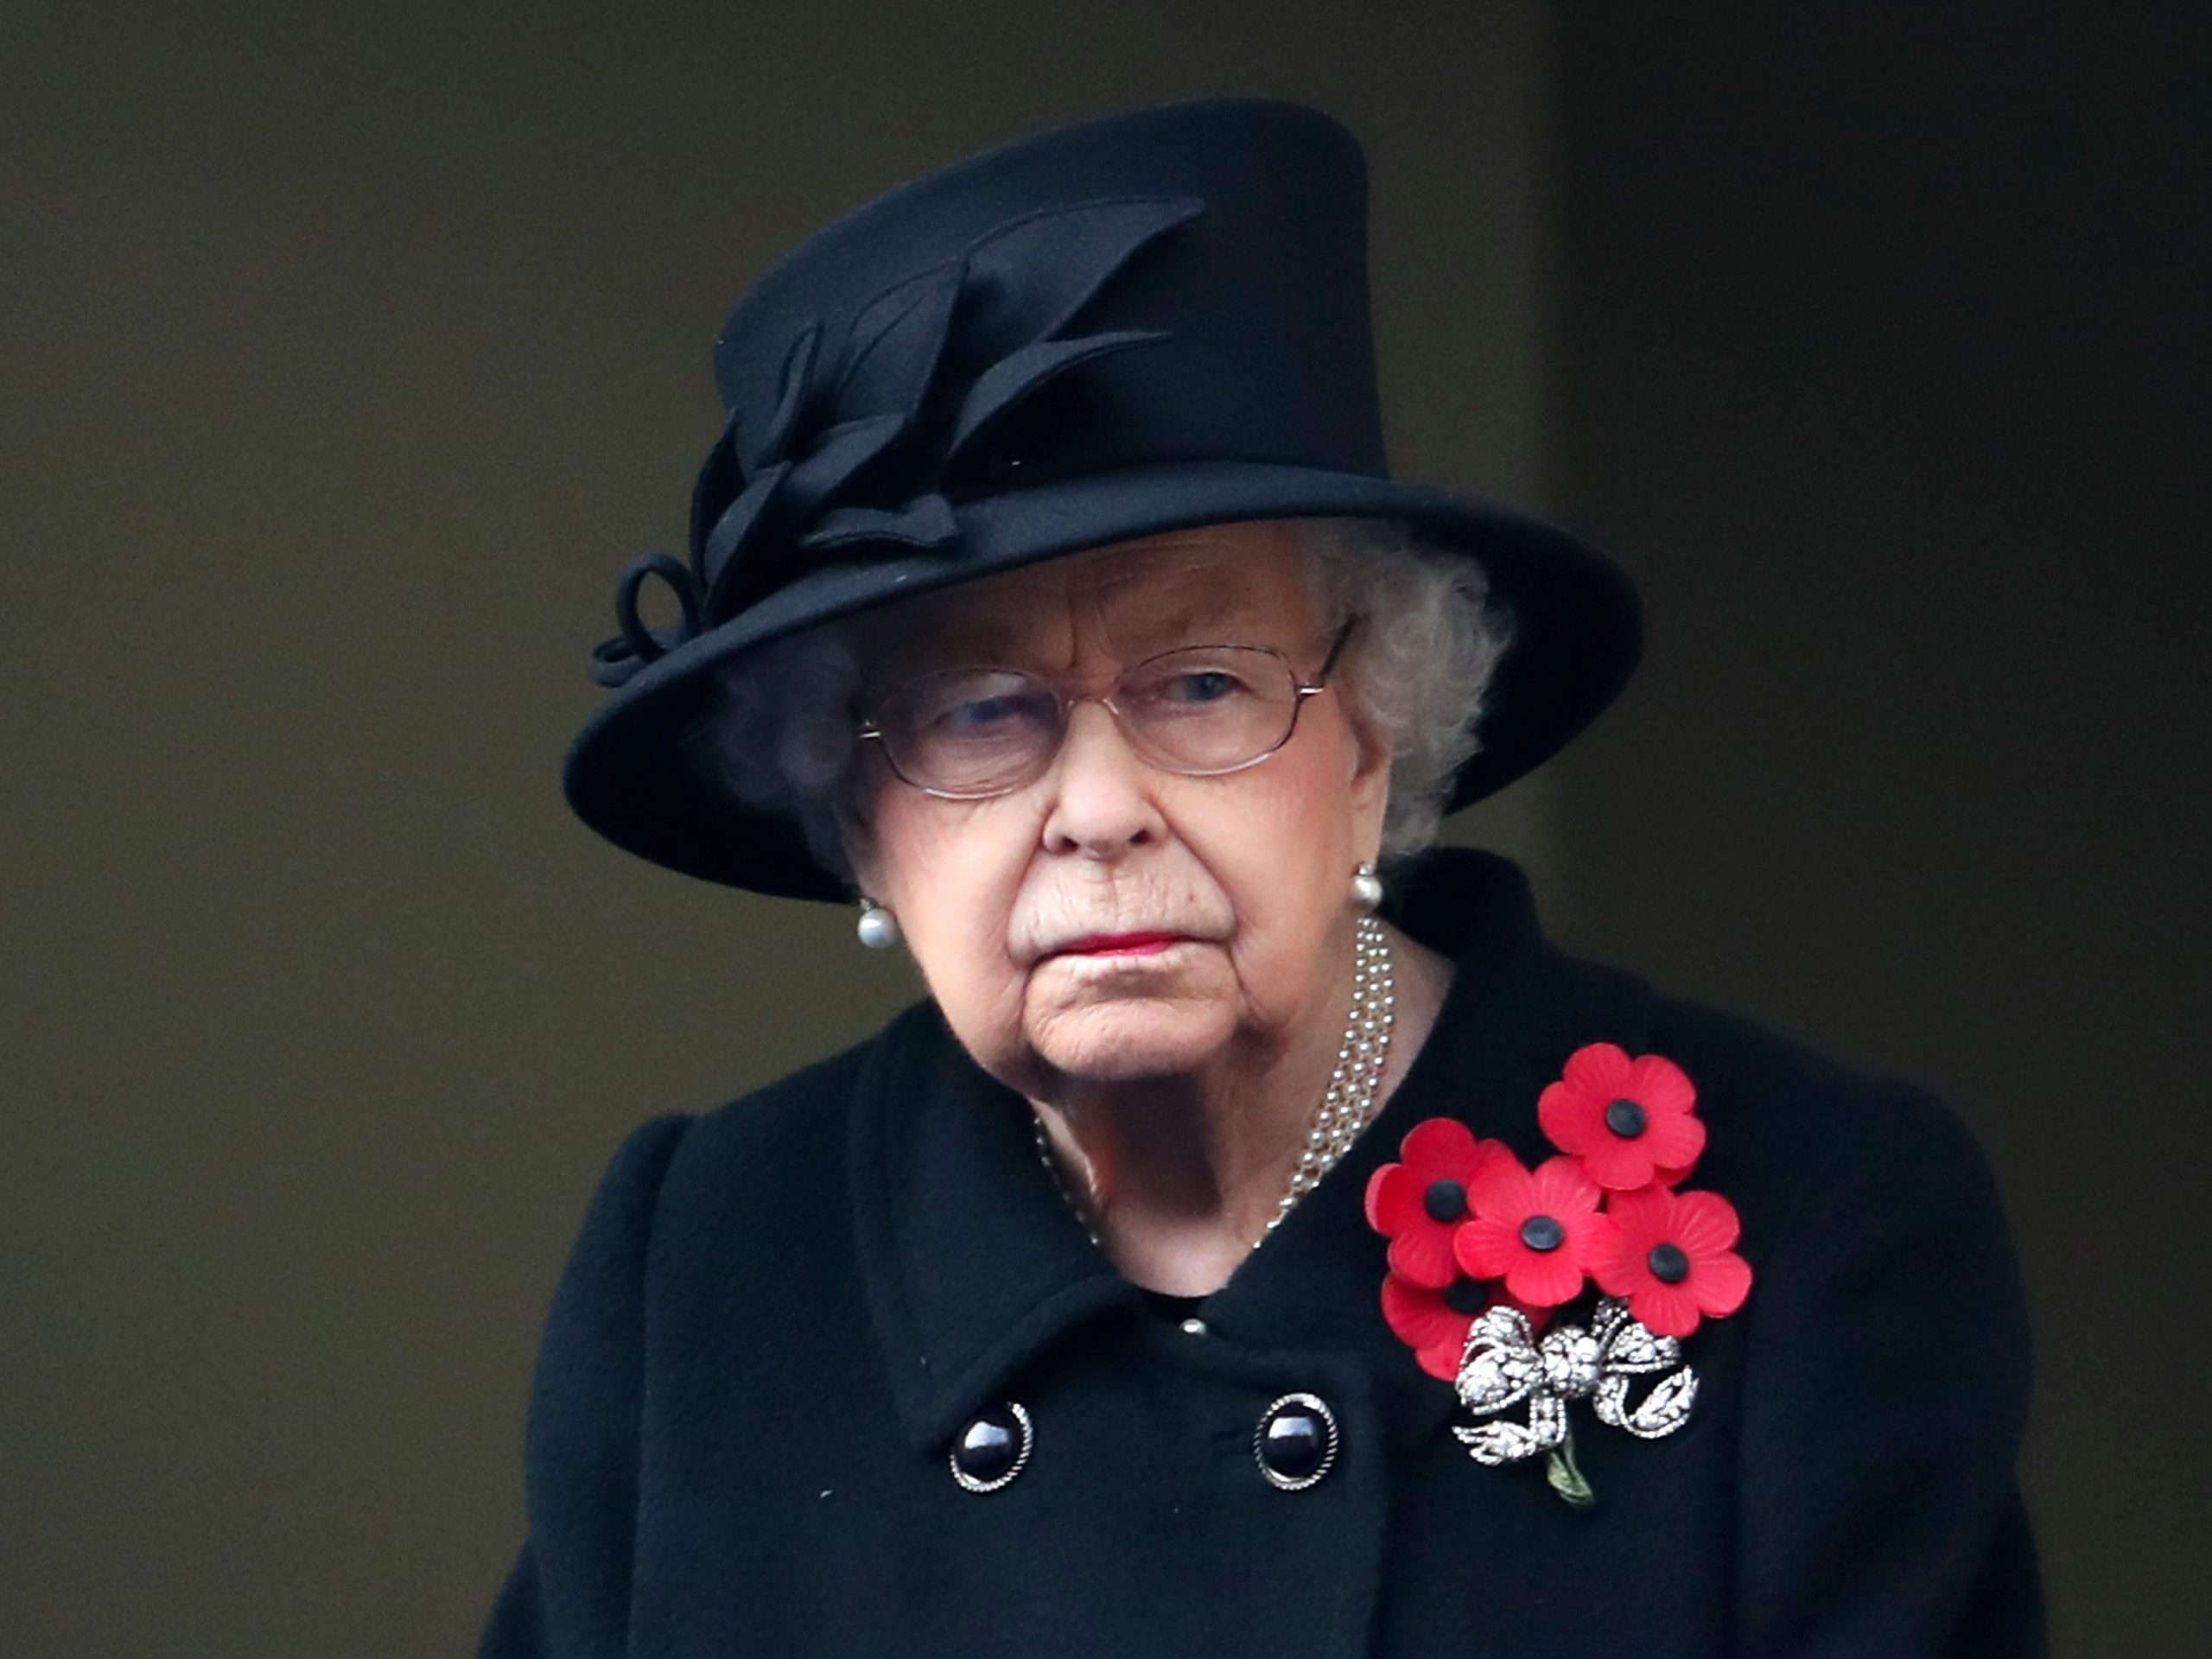 Britain's Queen Elizabeth II attends the Remembrance Sunday ceremony at the Cenotaph on Whitehall in central London, on November 8, 2020